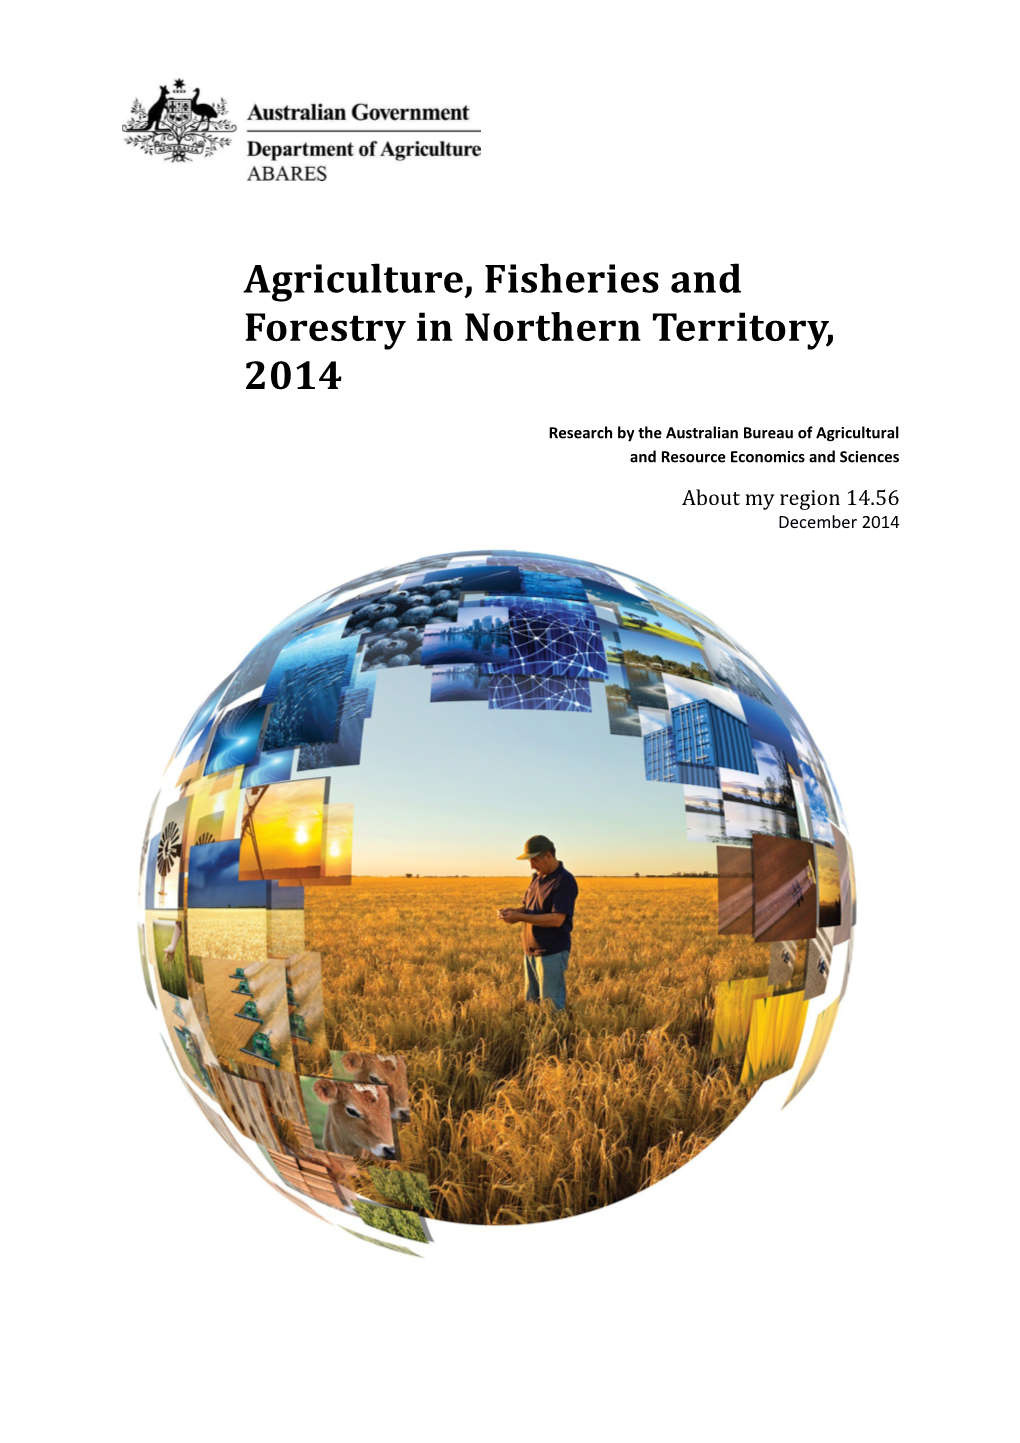 Agriculture, Fisheries and Forestry in Northern Territory, 2014 ABARES